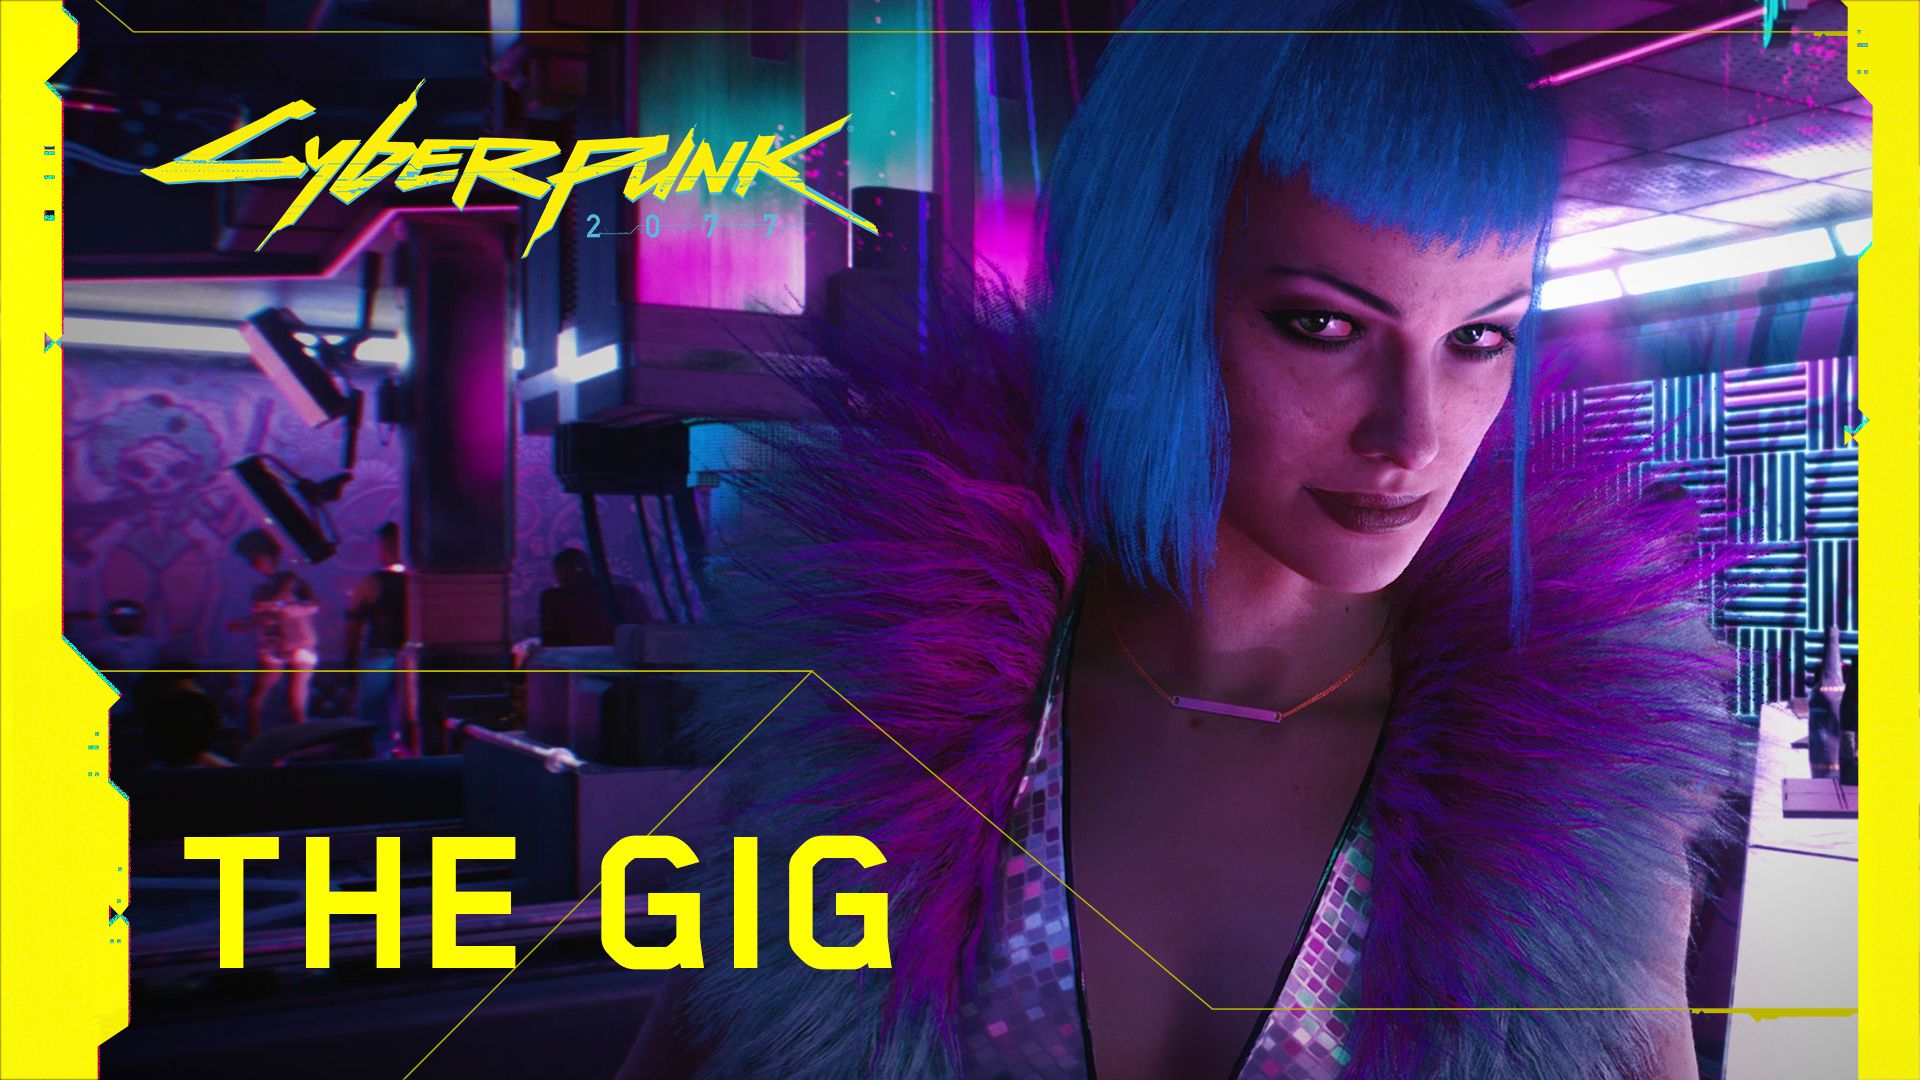 Cyberpunk 2077 Gifts The World With New Titled The Gig